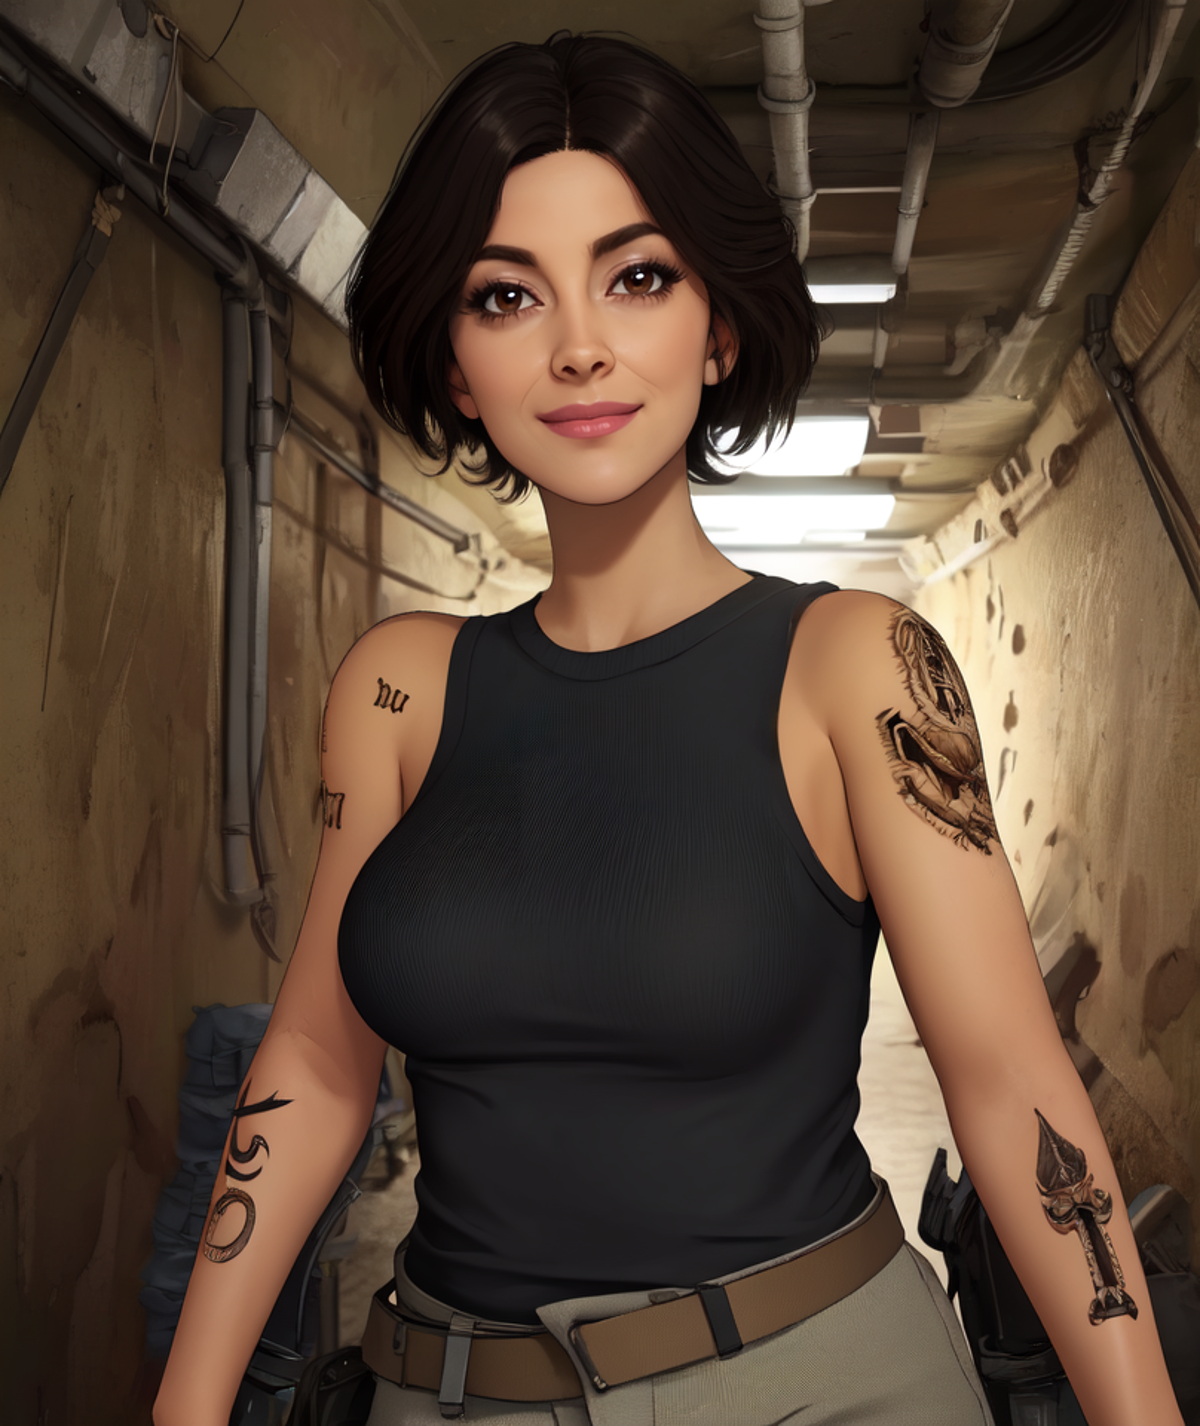 Valeria - Call Of Duty image by True_Might